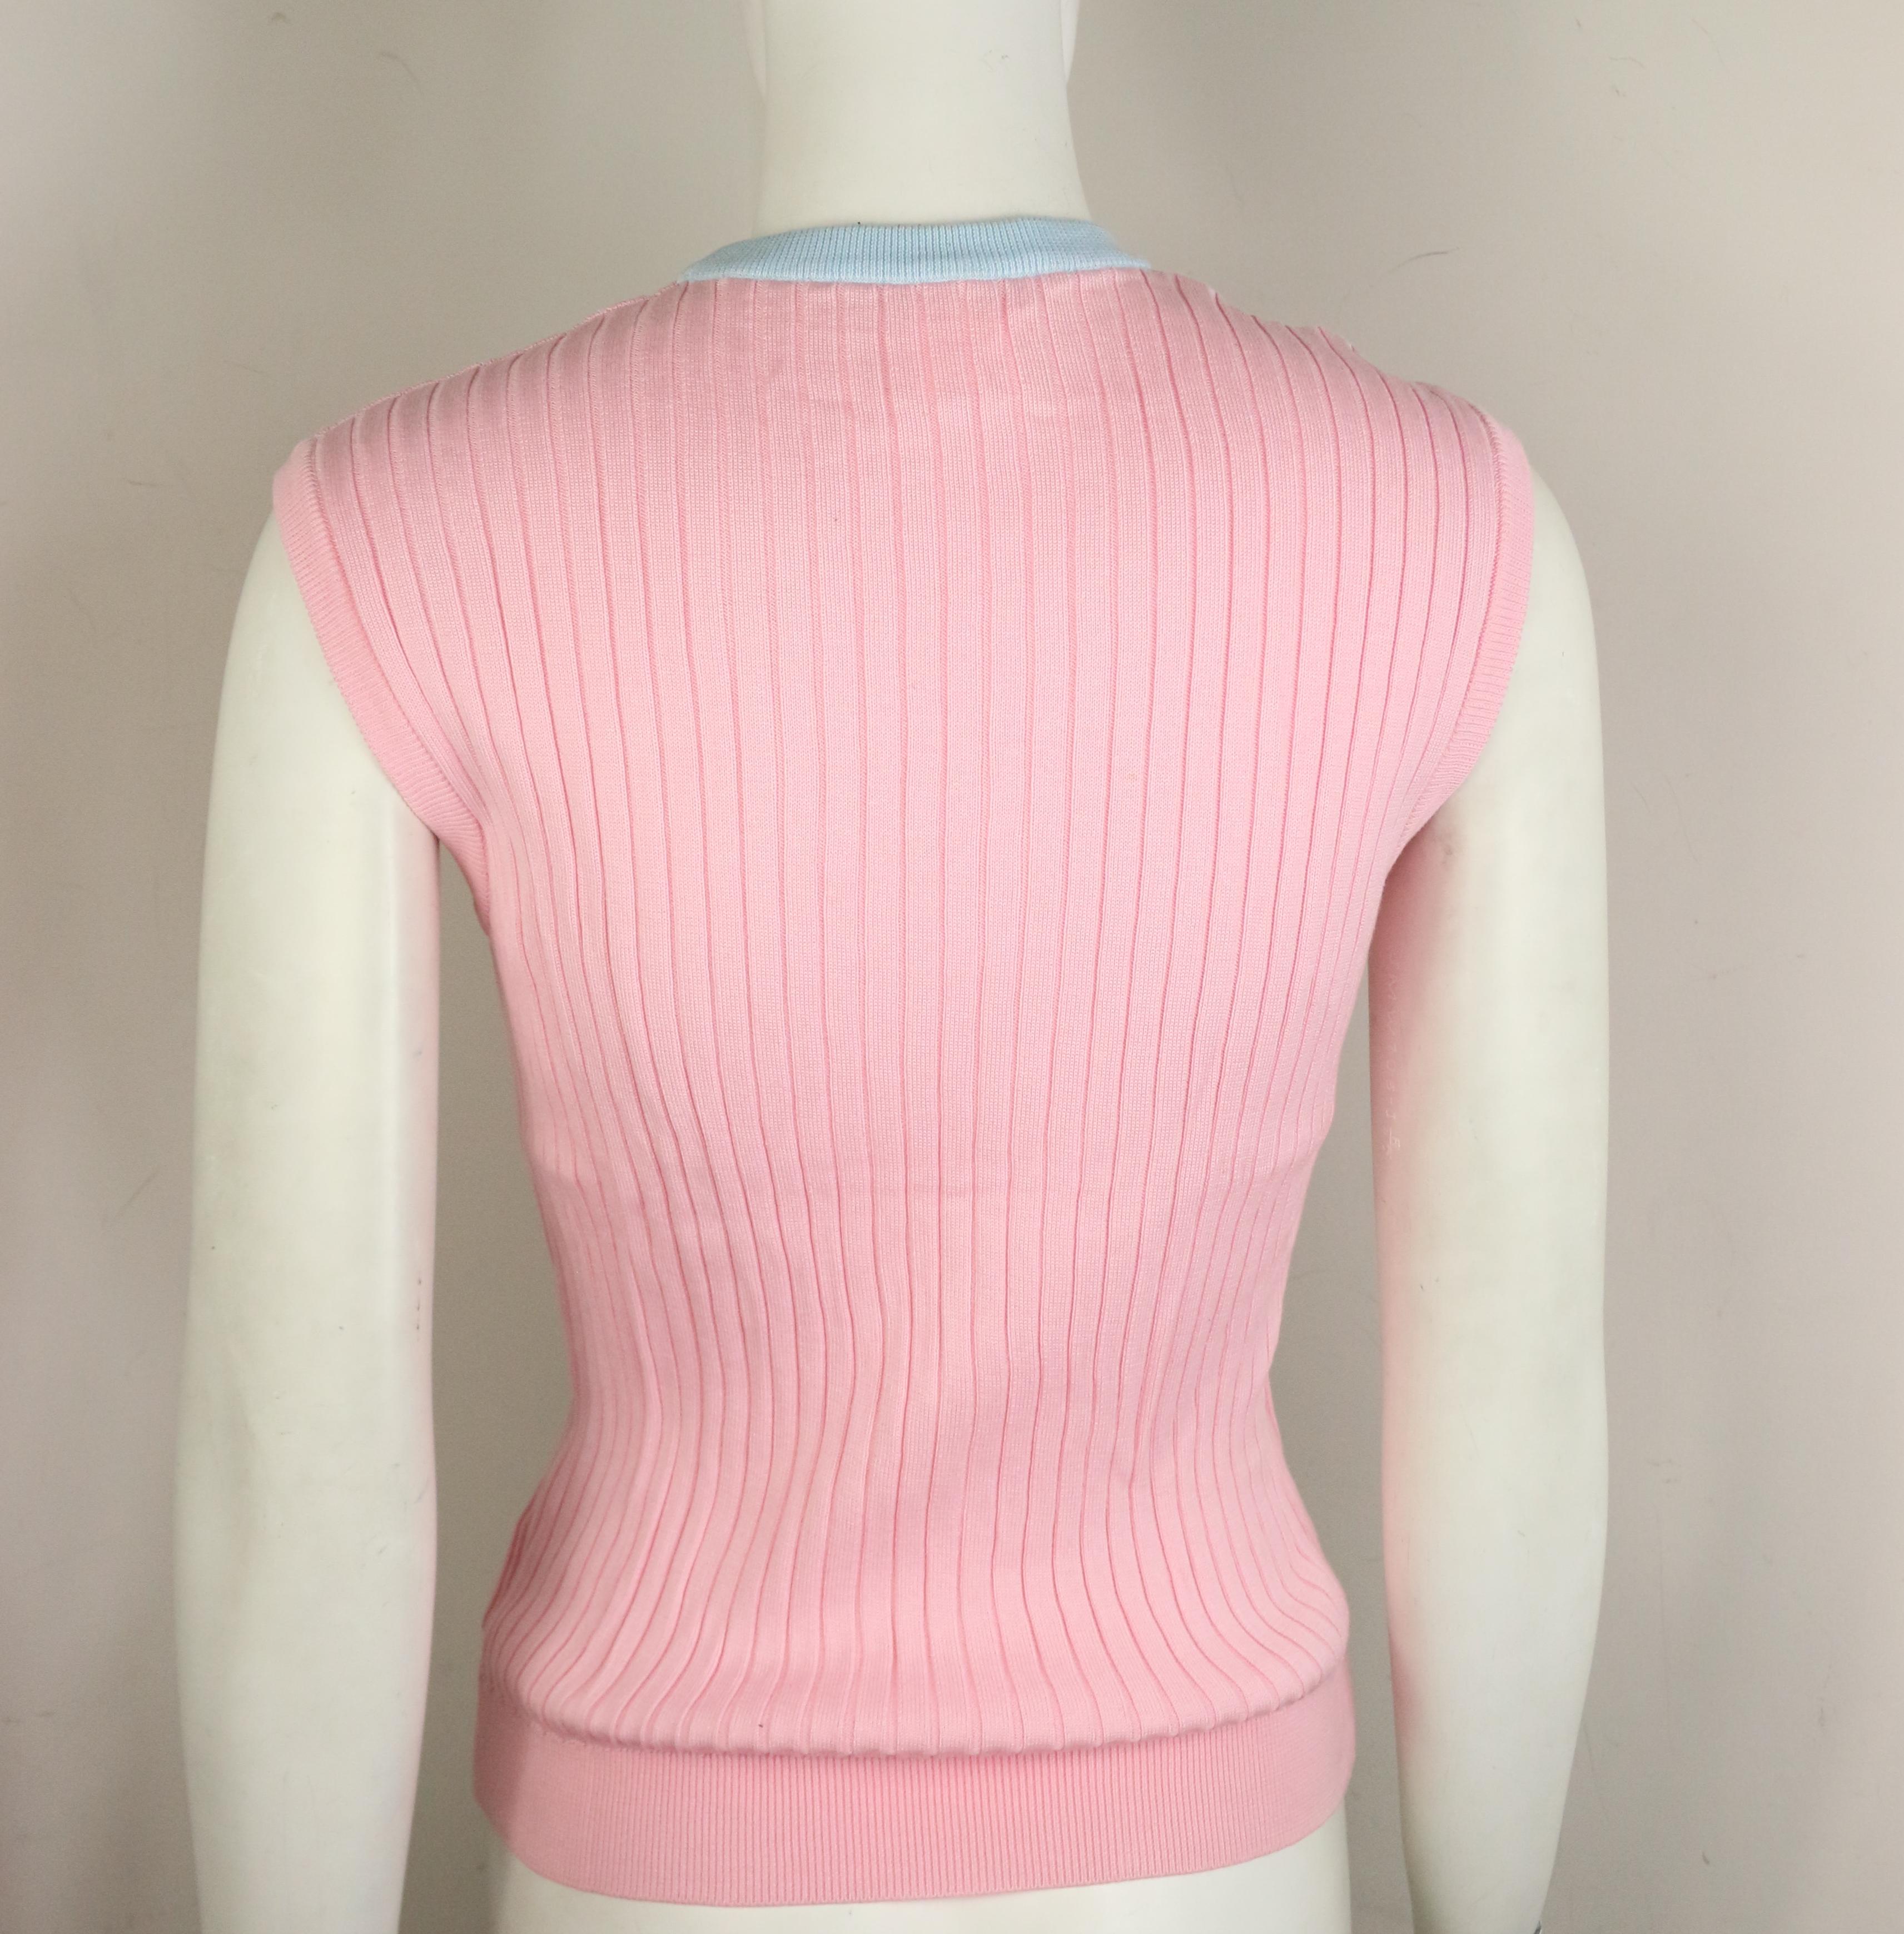 pink chanel top